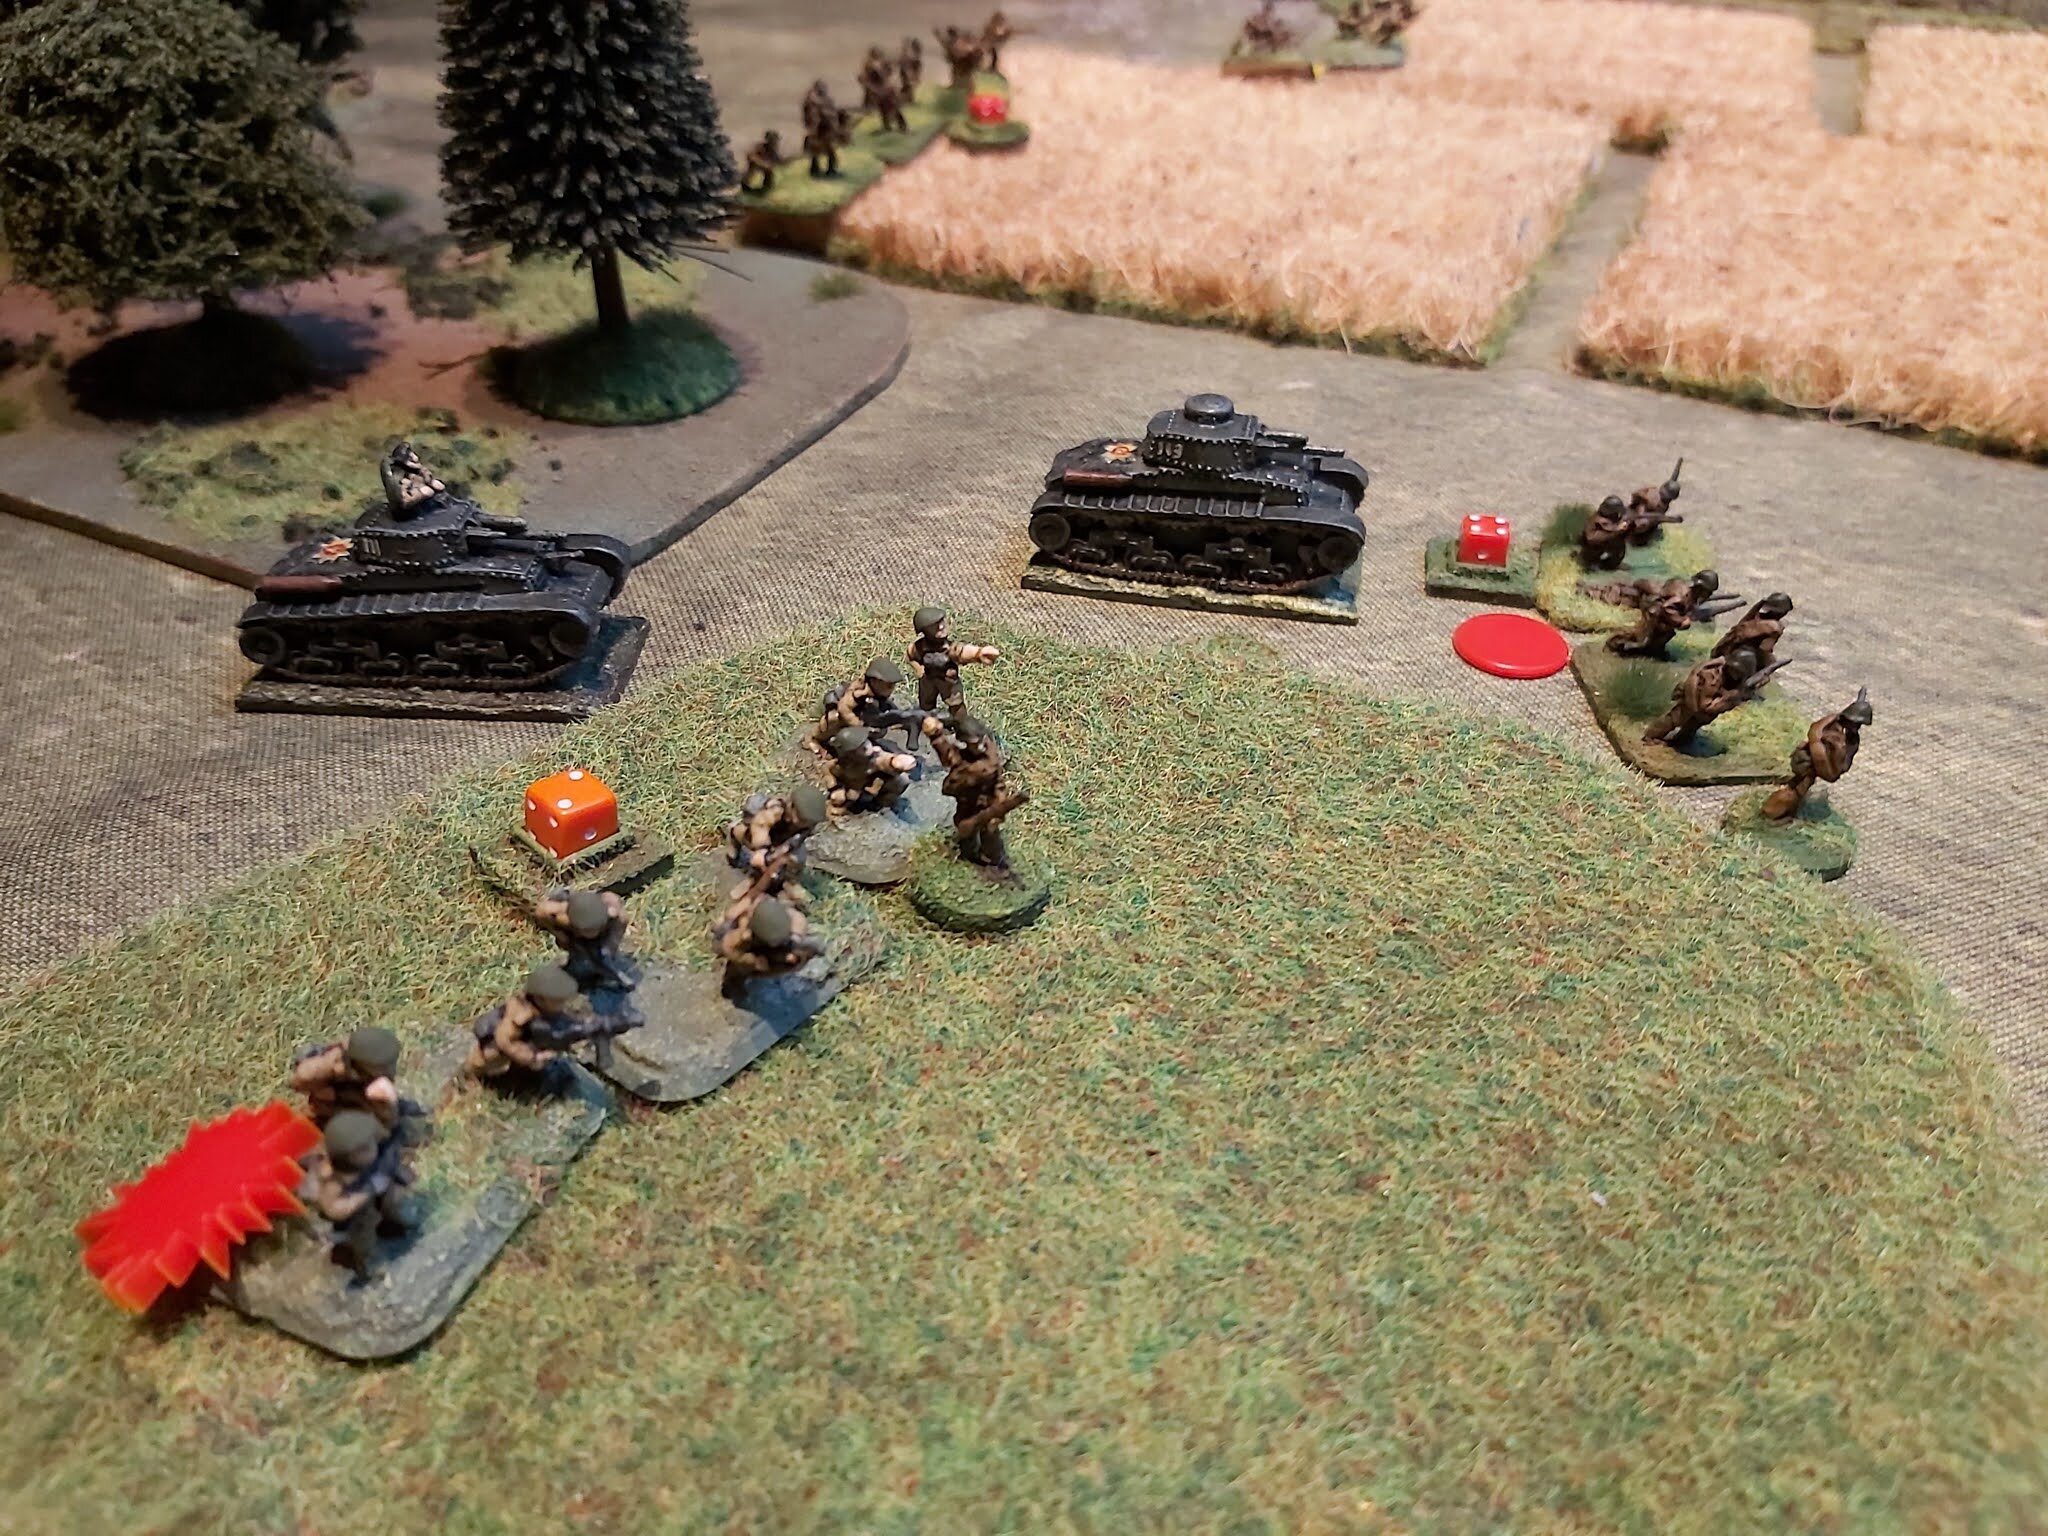 Finally getting the R-2s moving, the attackers were able to bring in some heavy guns to support the infantry attack.